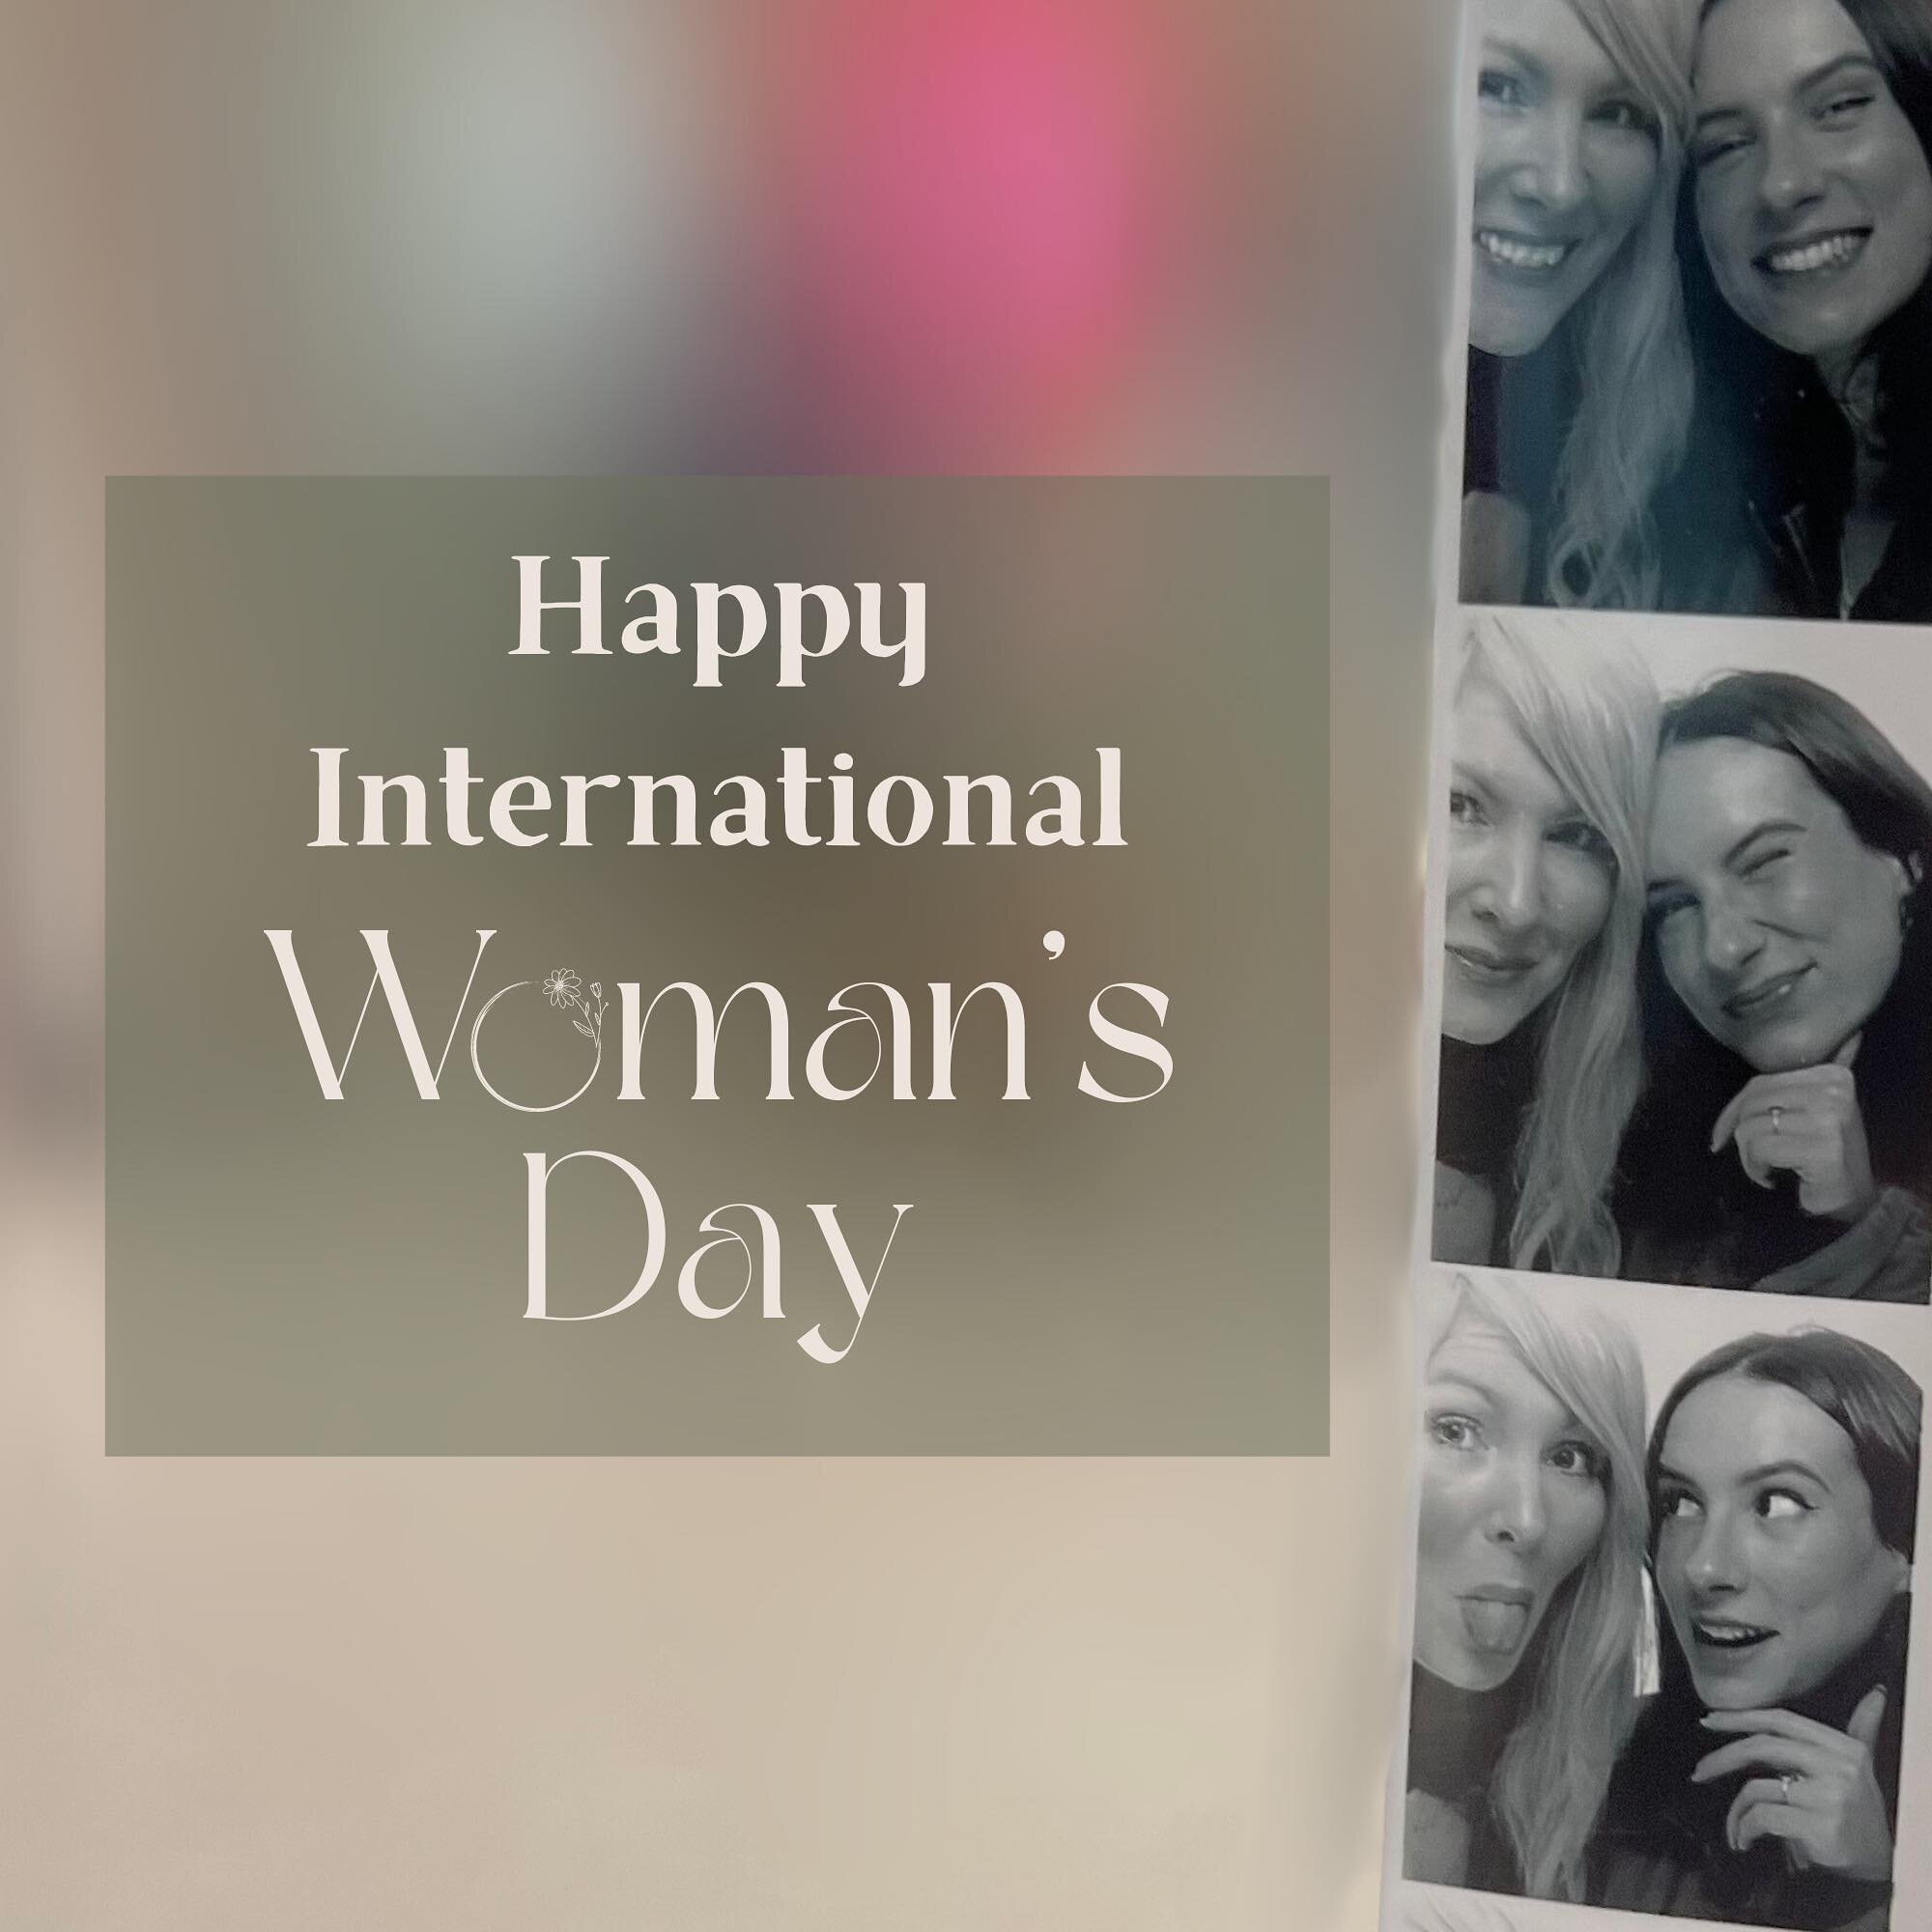 Happy International Women&rsquo;s day from the Shannon and Bloom HUSTLERS! 

Seeing as it&rsquo;s me (Rosie) who runs the instagram, I guess this is the PERFECT time to say:

LAUREN I ADORE YOU! I adore working with you and your voice notes being the